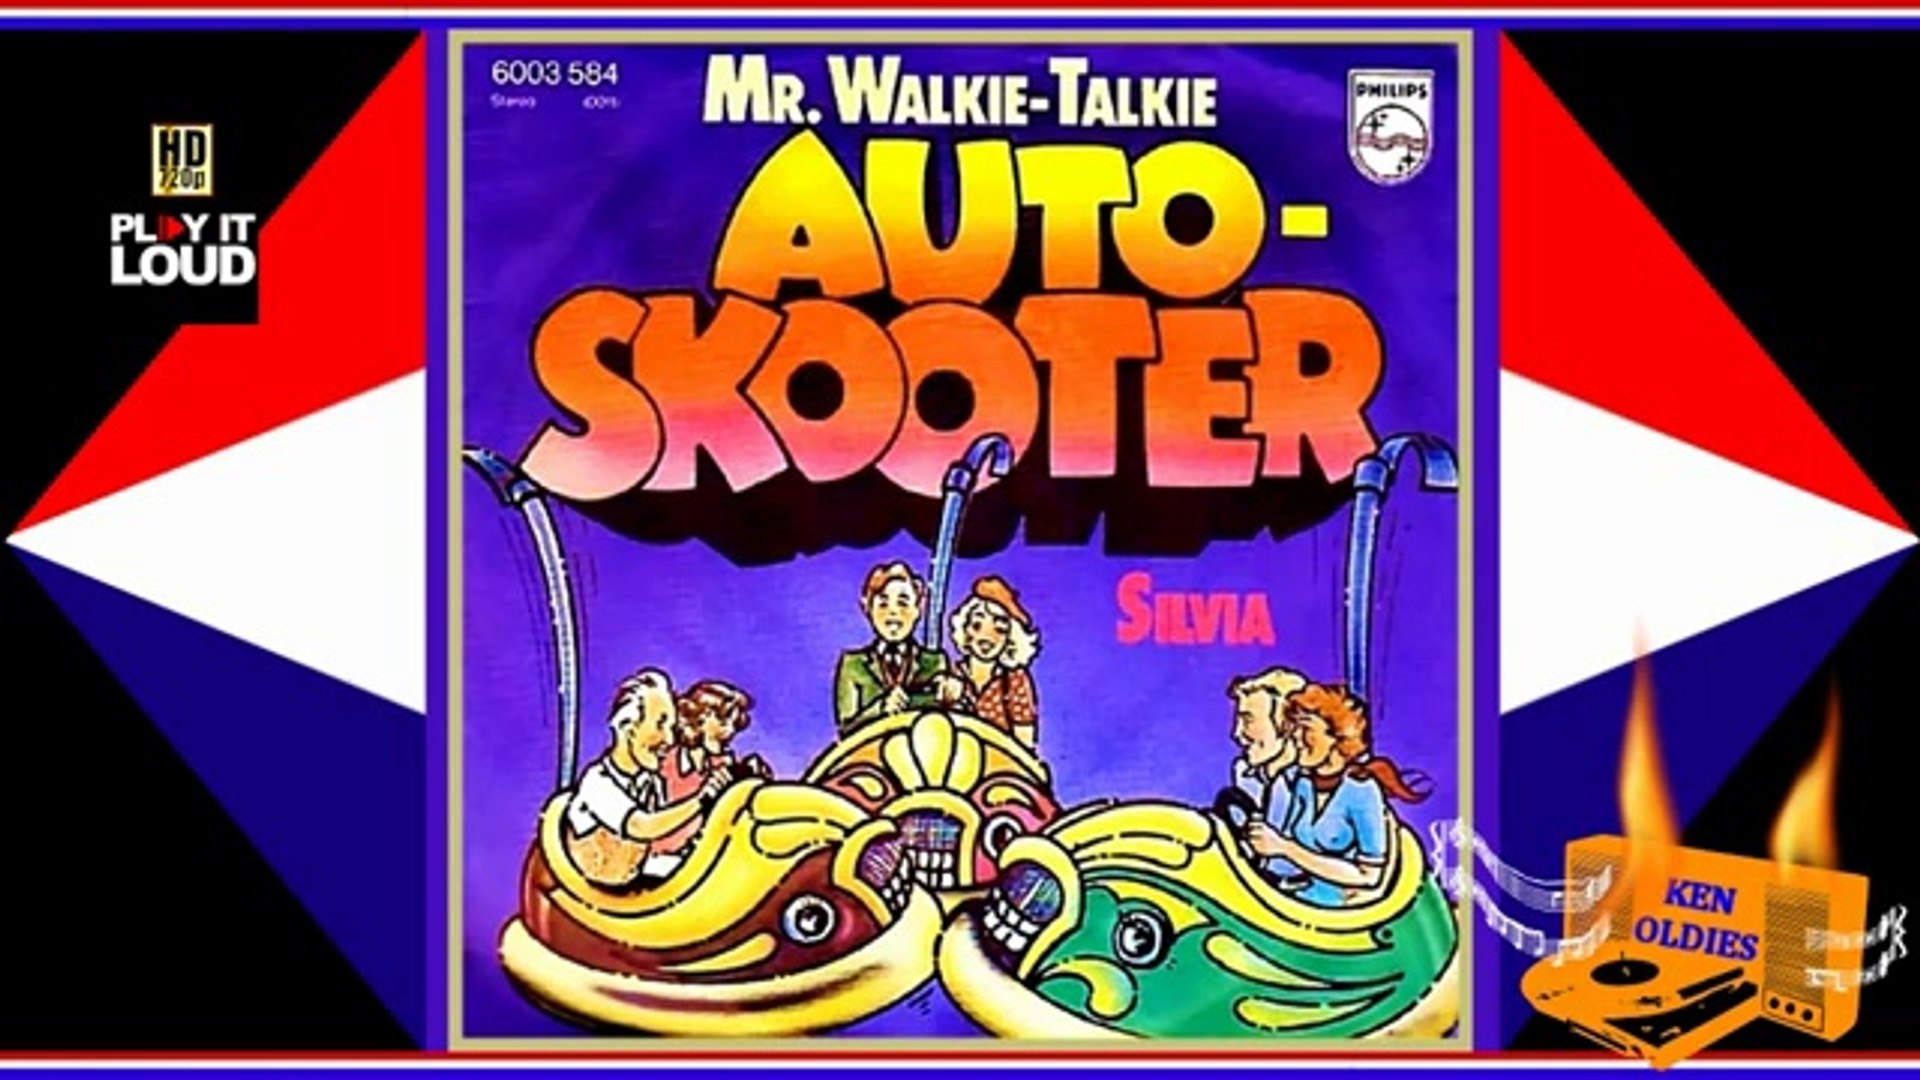 Mr. Walkie Talkie - Autoscooter - Video Dailymotion